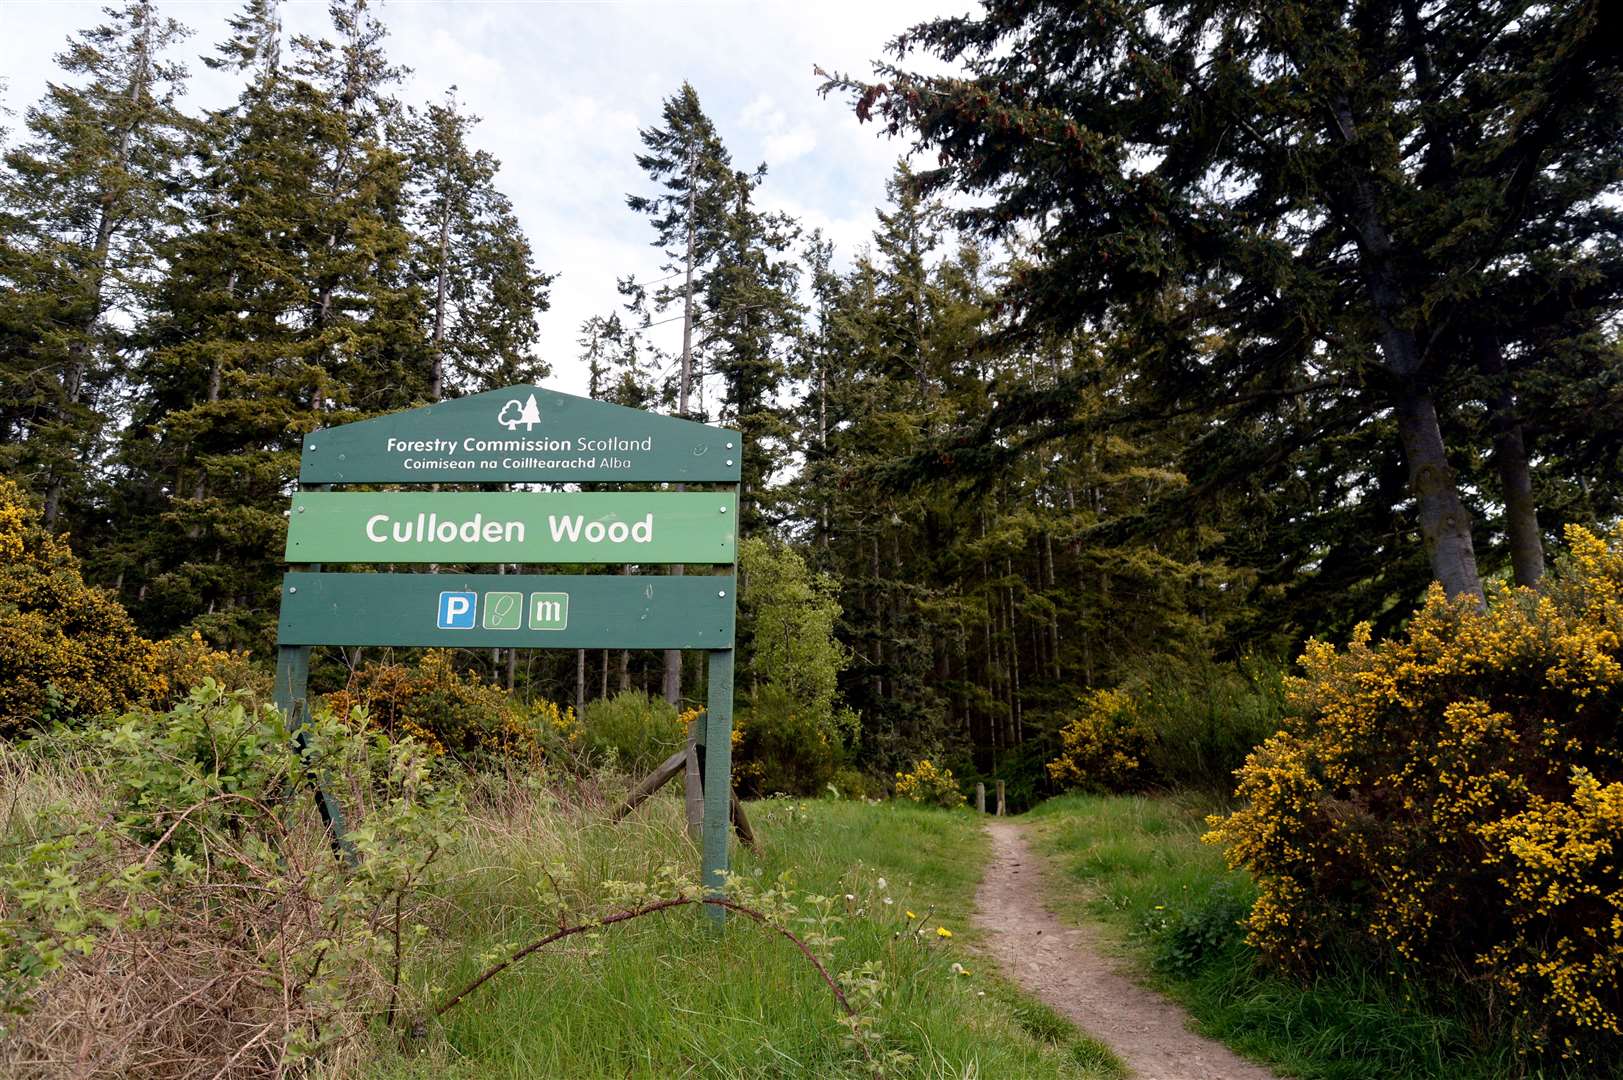 Culloden Wood is a popular spot for walking.